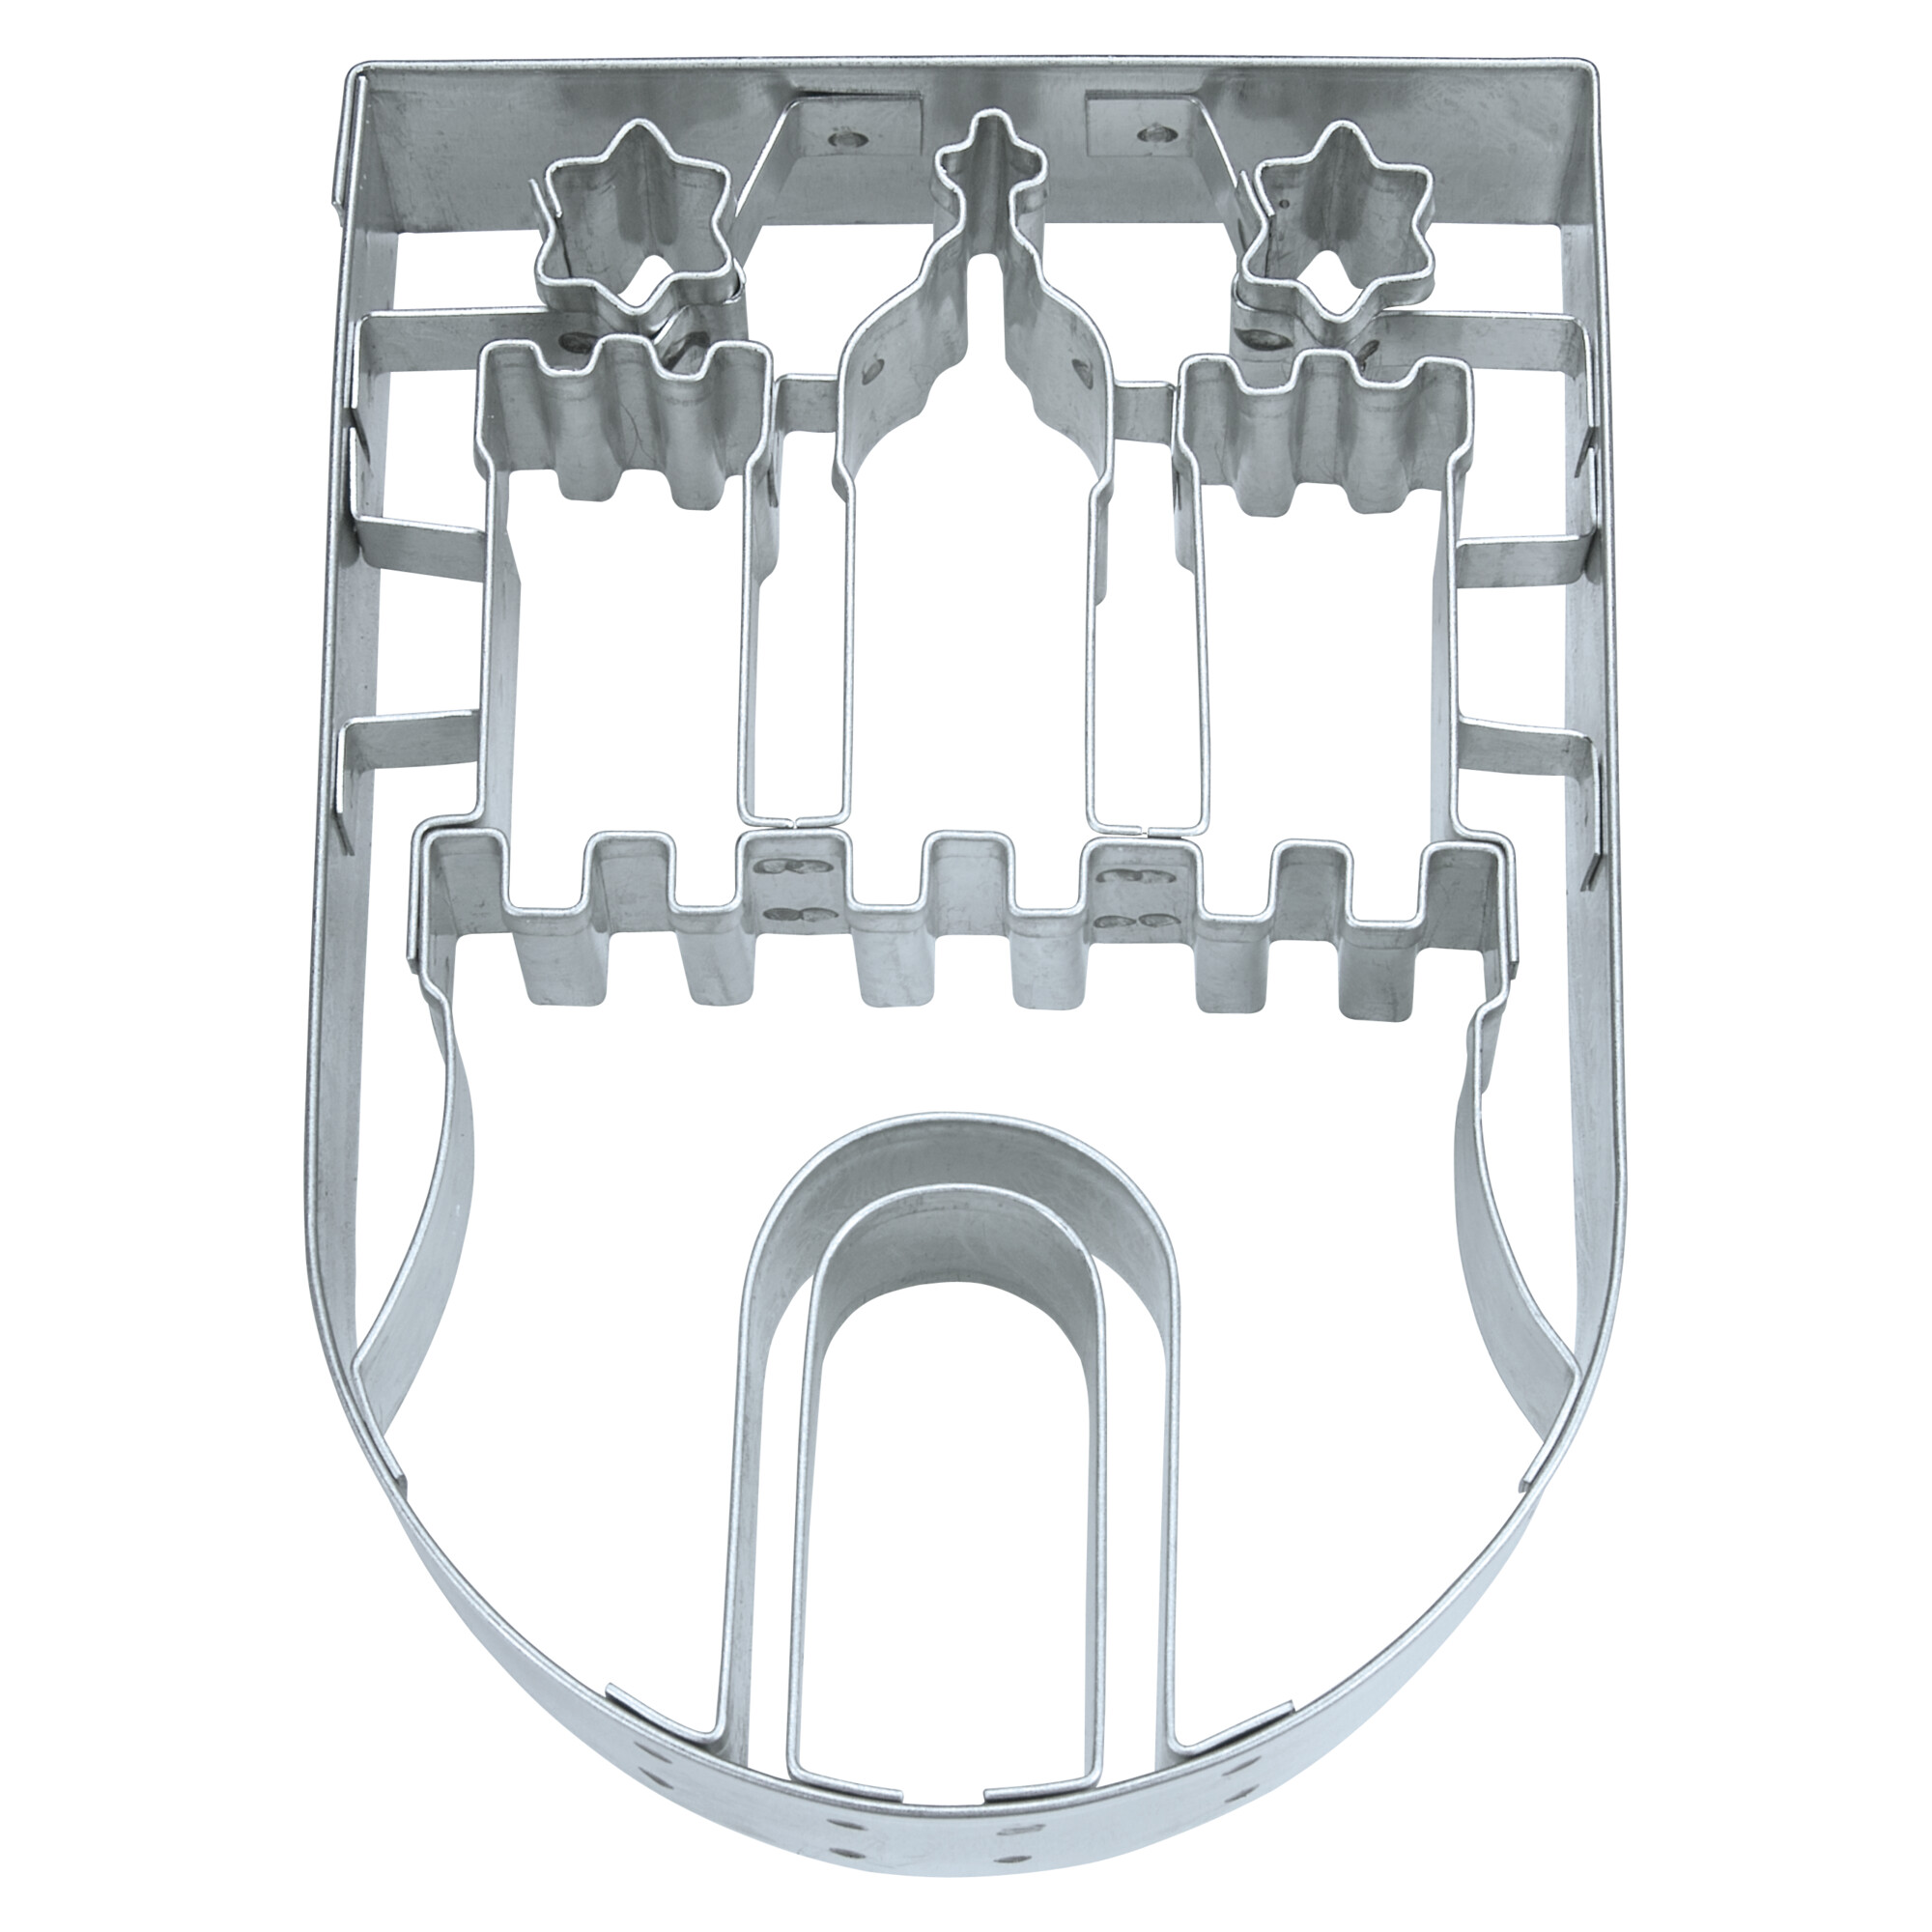 Cookie cutter with stamp – Hamburg coat of arms